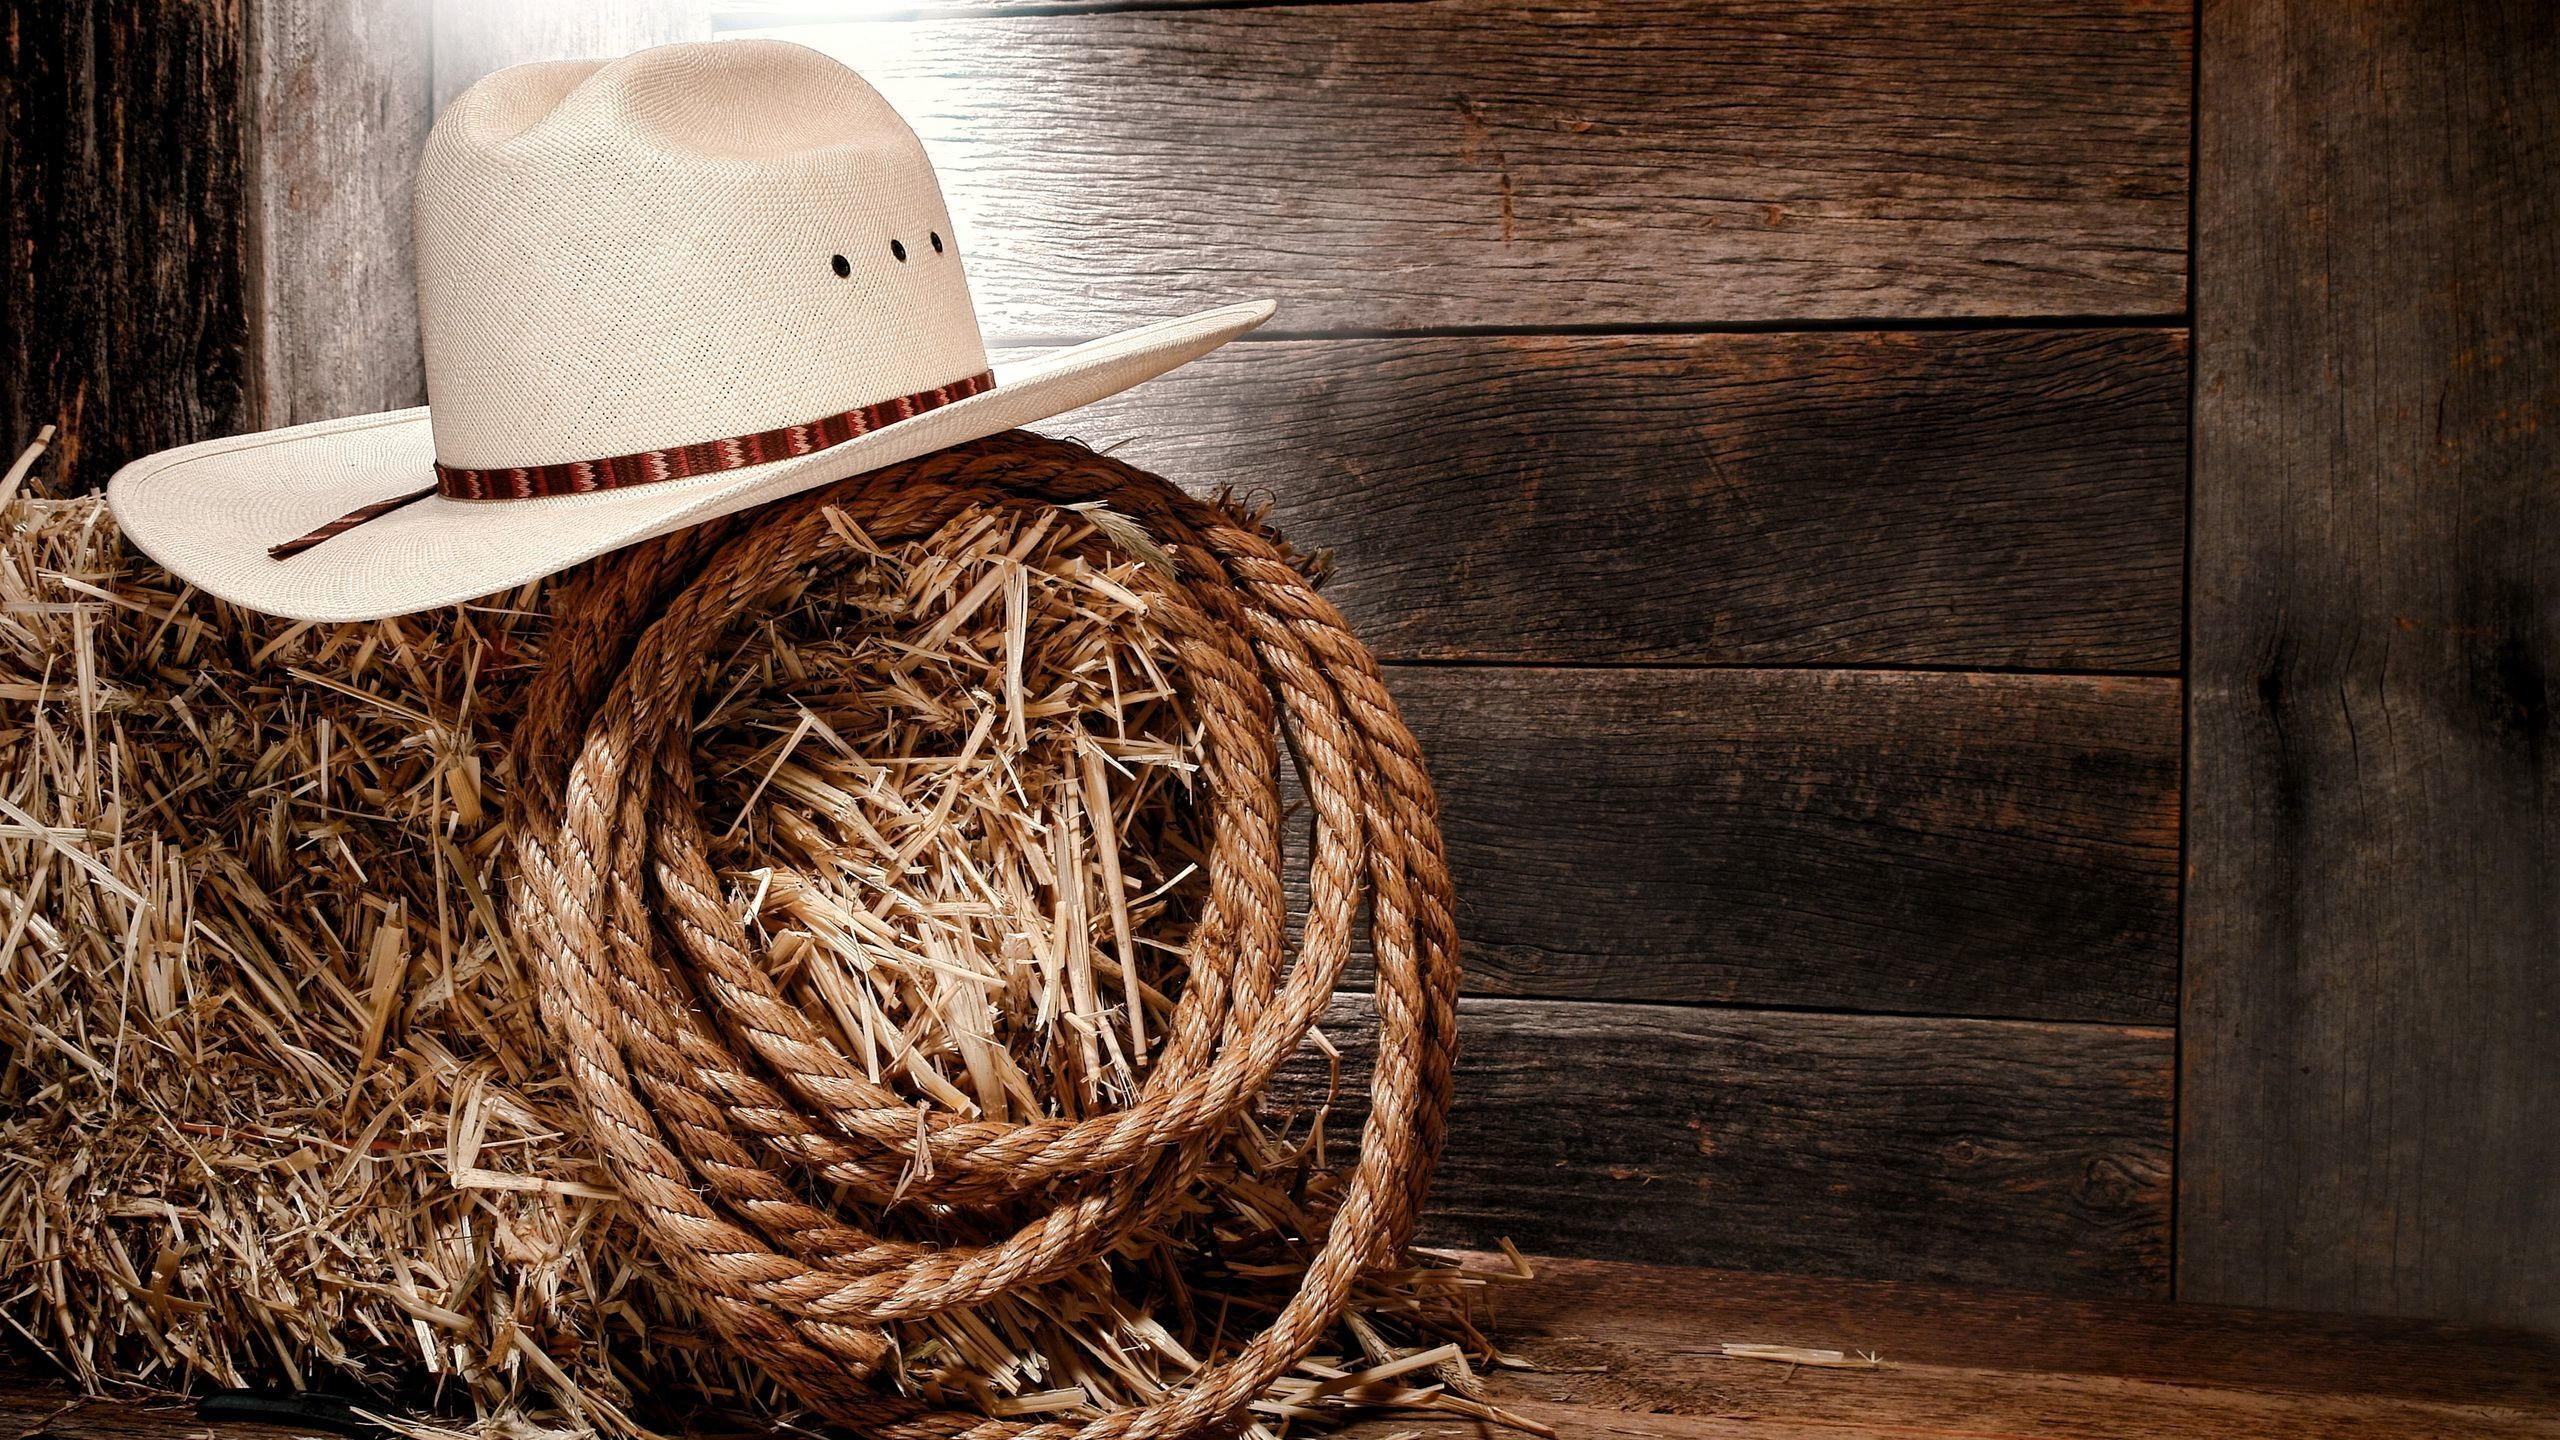 Download wallpaper USA, hat, Style, wooden, country, Texas, cowboy, boots, America, rope, hay, boards, horseshoe, cowboy hat, section miscellanea in resolution 2560x1440